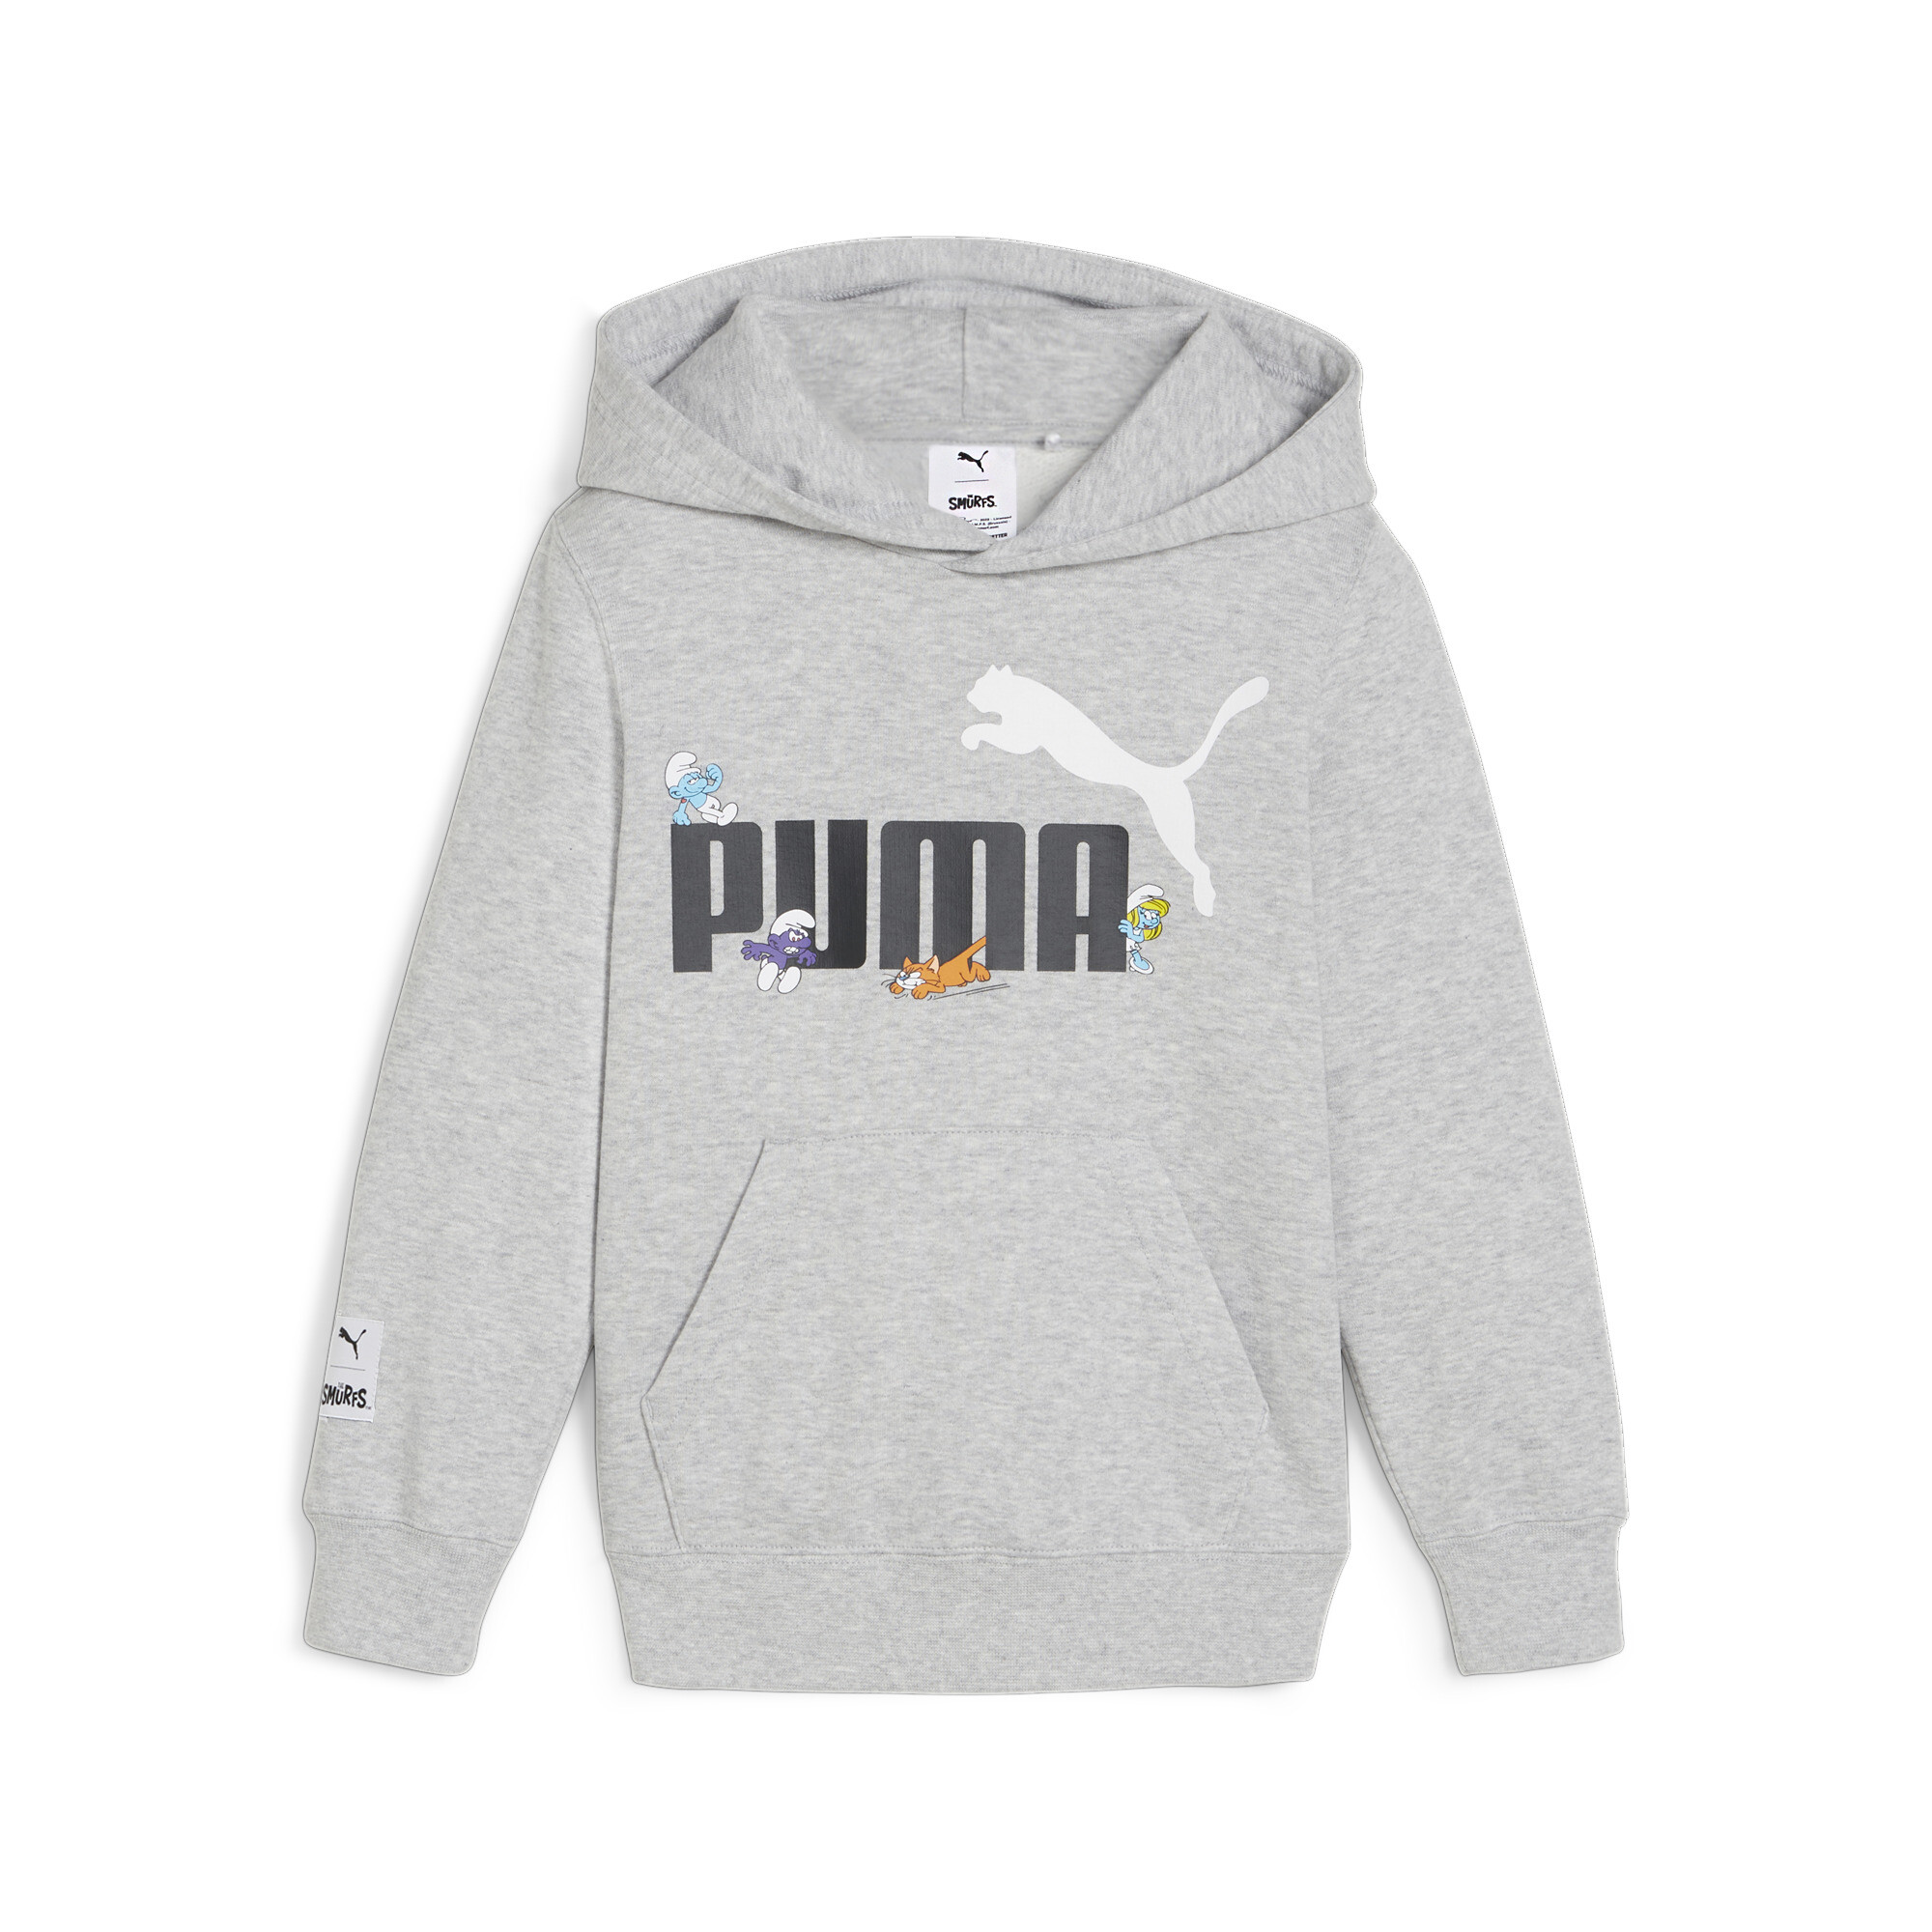 PUMA X THE SMURFS Hoodie In Heather, Size 9-10 Youth